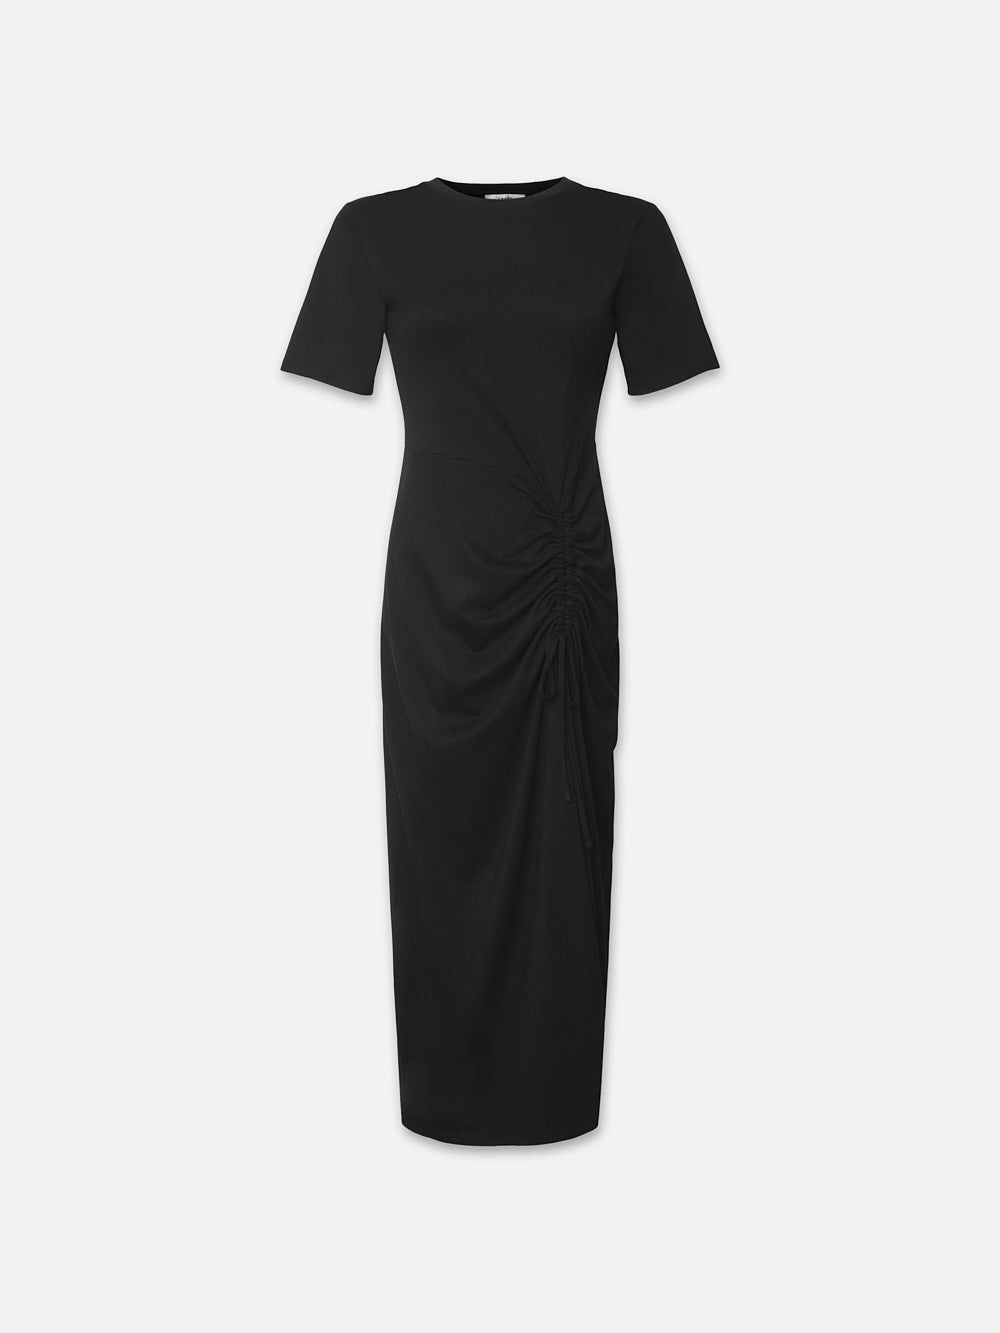 Ruched Front Tie Dress in Black - 1